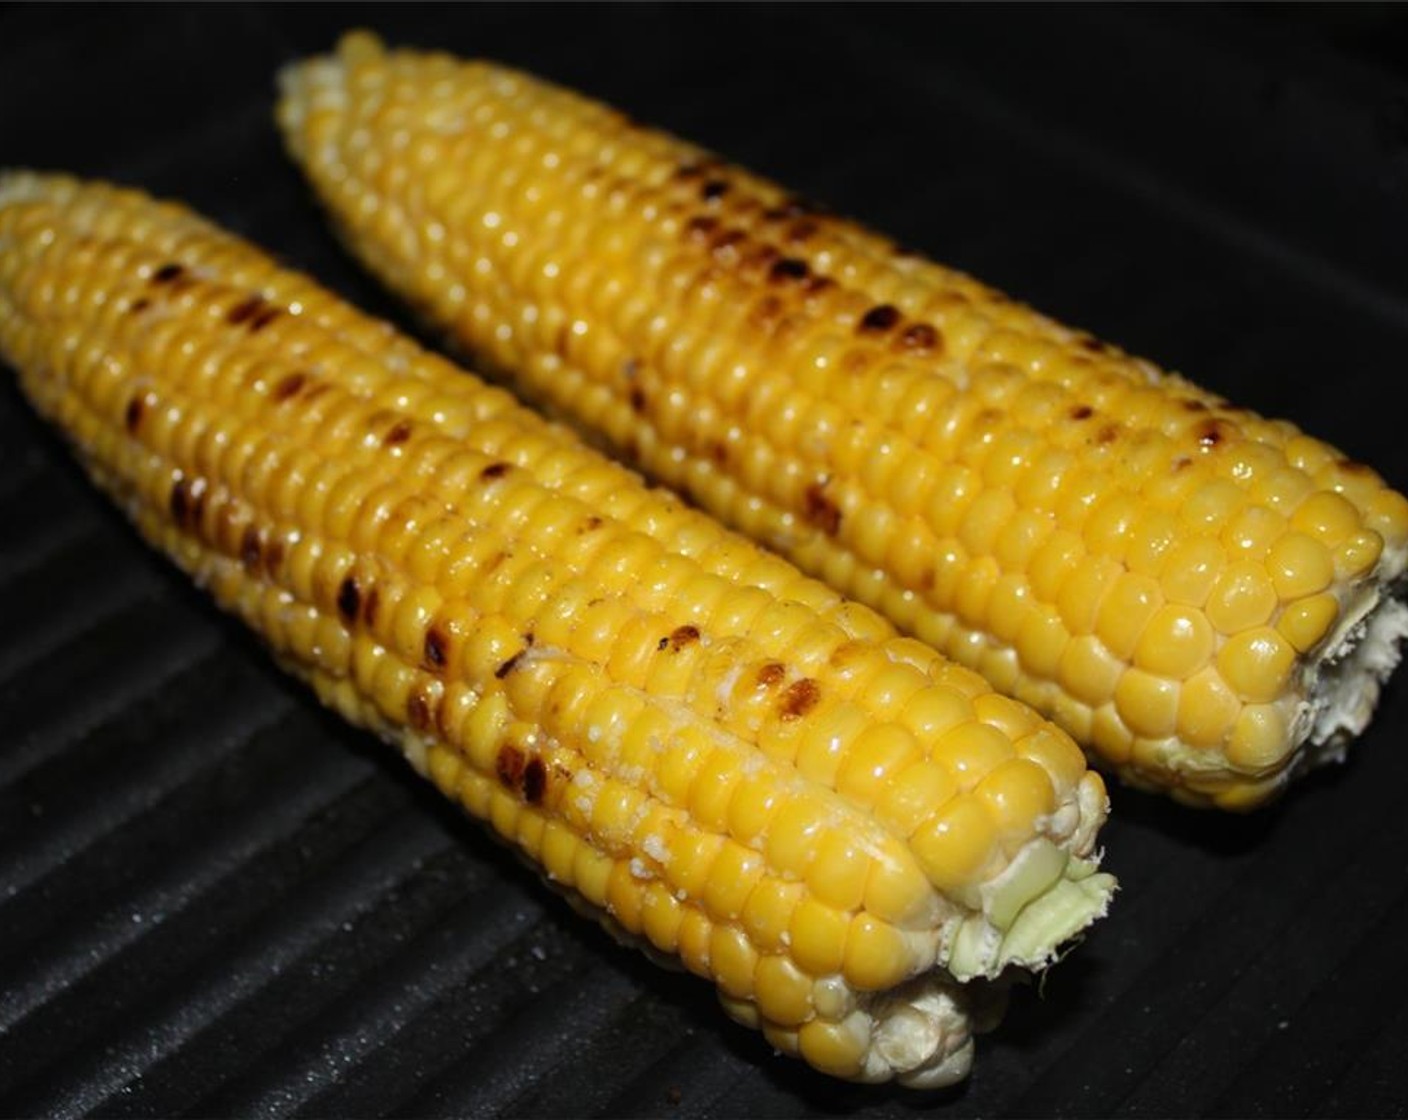 step 6 Heat a grill/grill pan over medium heat. Brush the corn with Olive Oil (1 Tbsp) and season with Salt (to taste). When the grill is hot, add the corn and cook for 10-12 minutes.